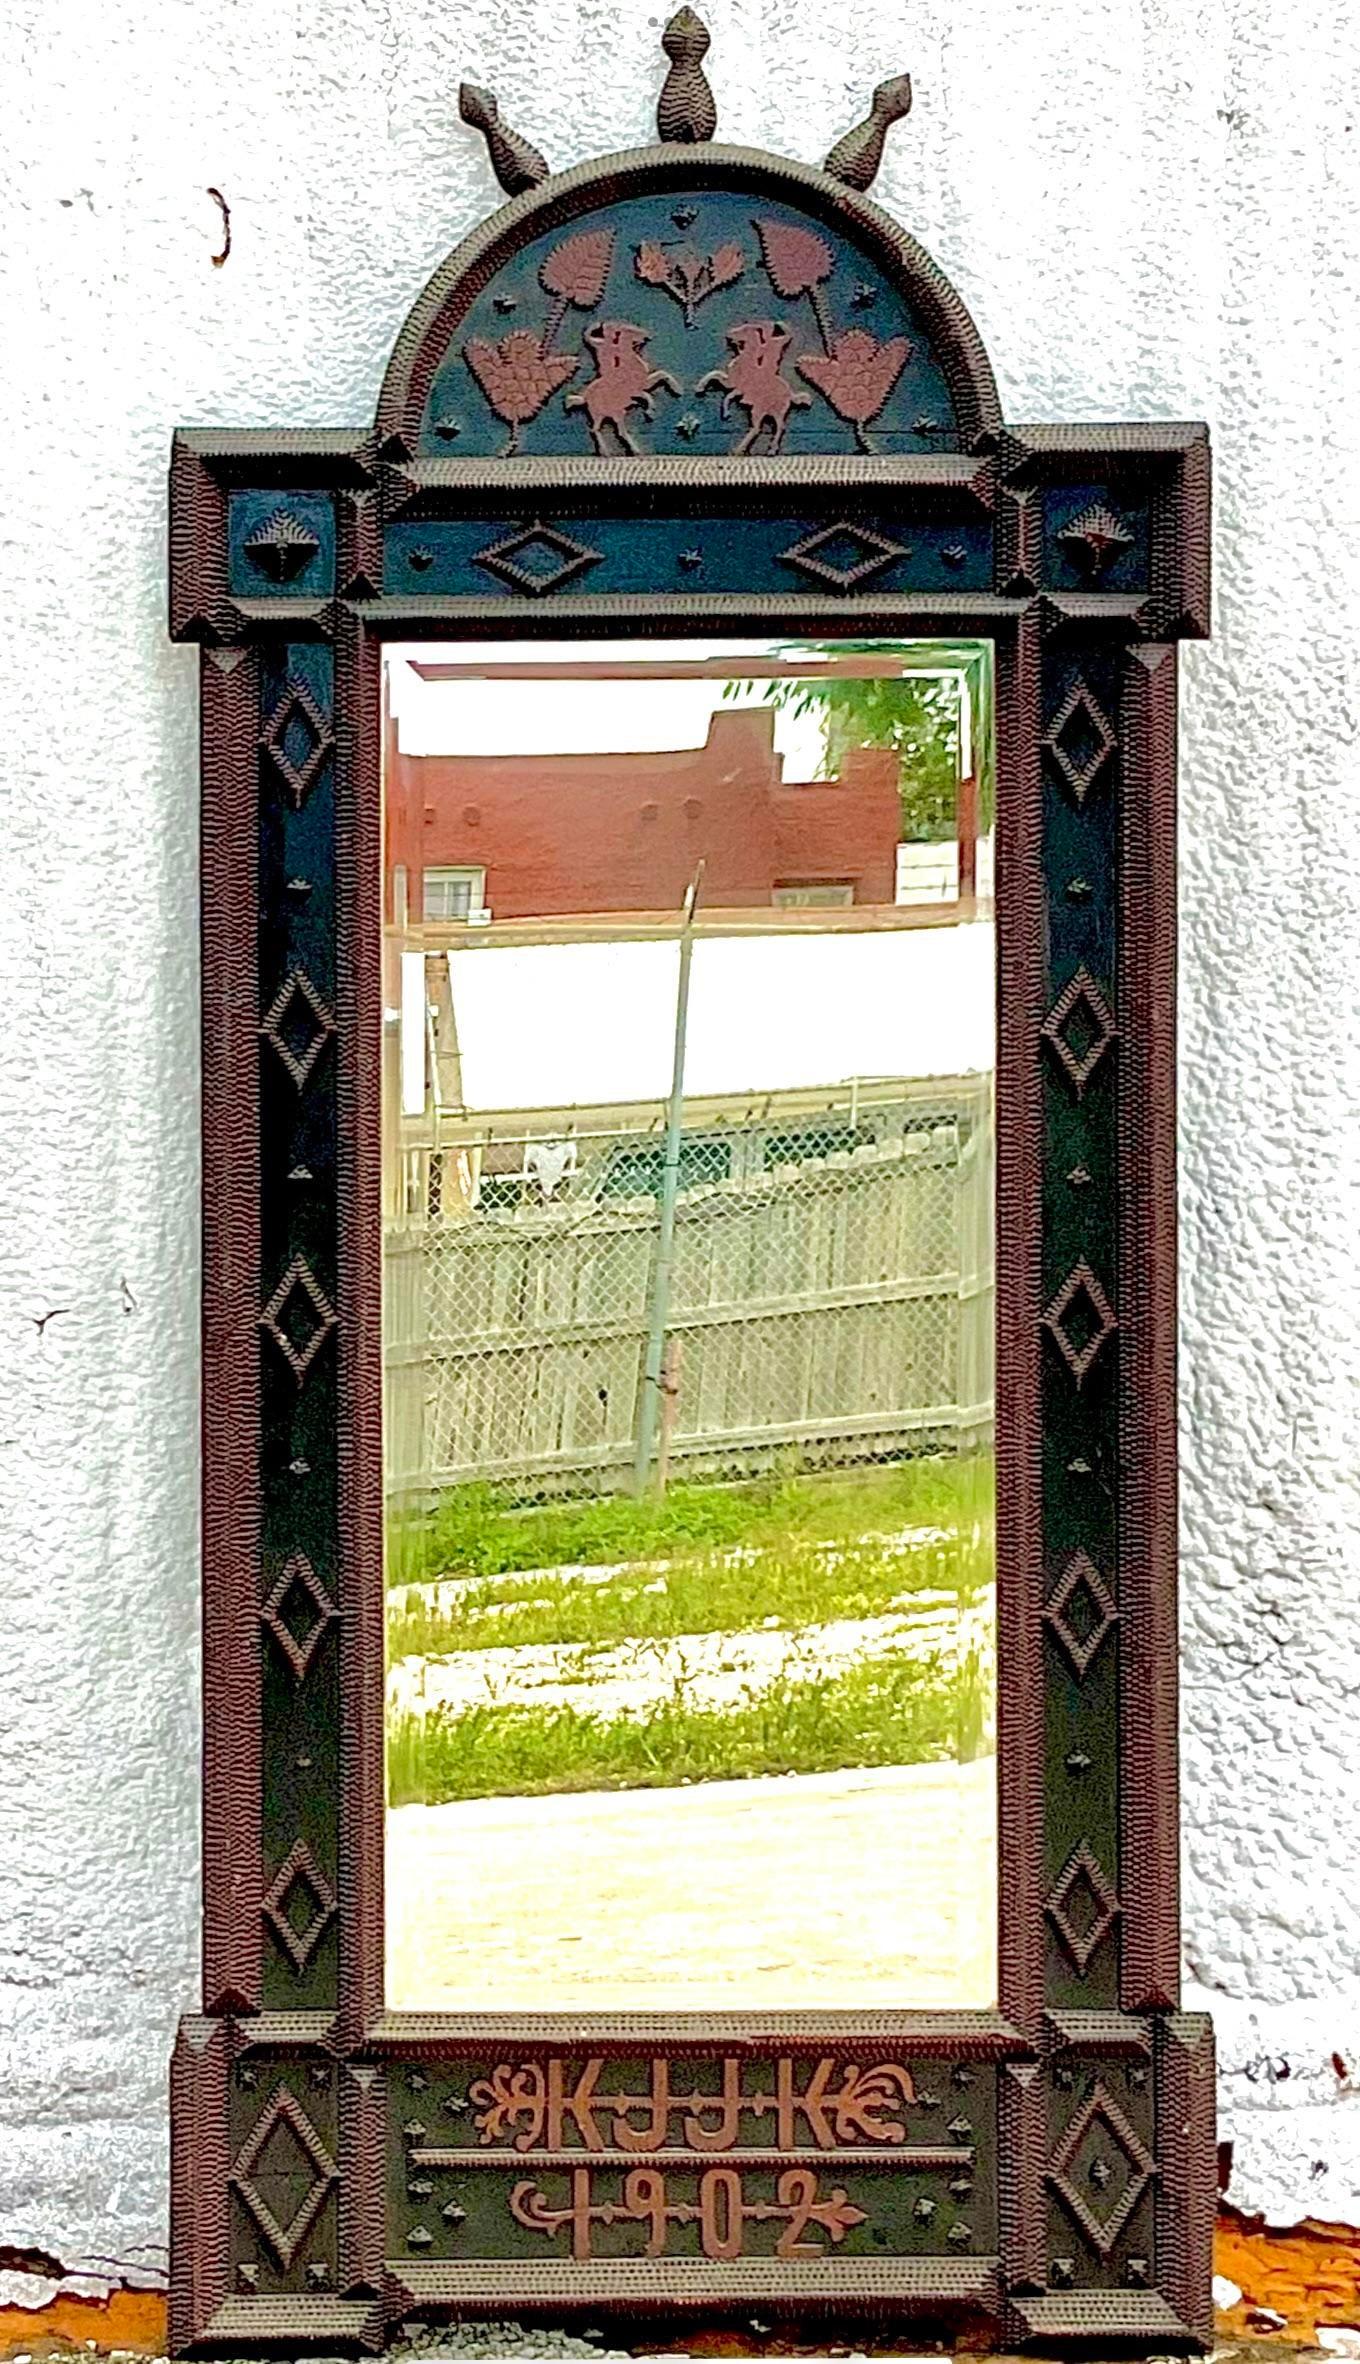 Incredible vintage Boho wall mirror. A striking Tramp Art mirror with vintage icons. Marked 1902 across the bottom. Acquired from a Palm Beach estate.